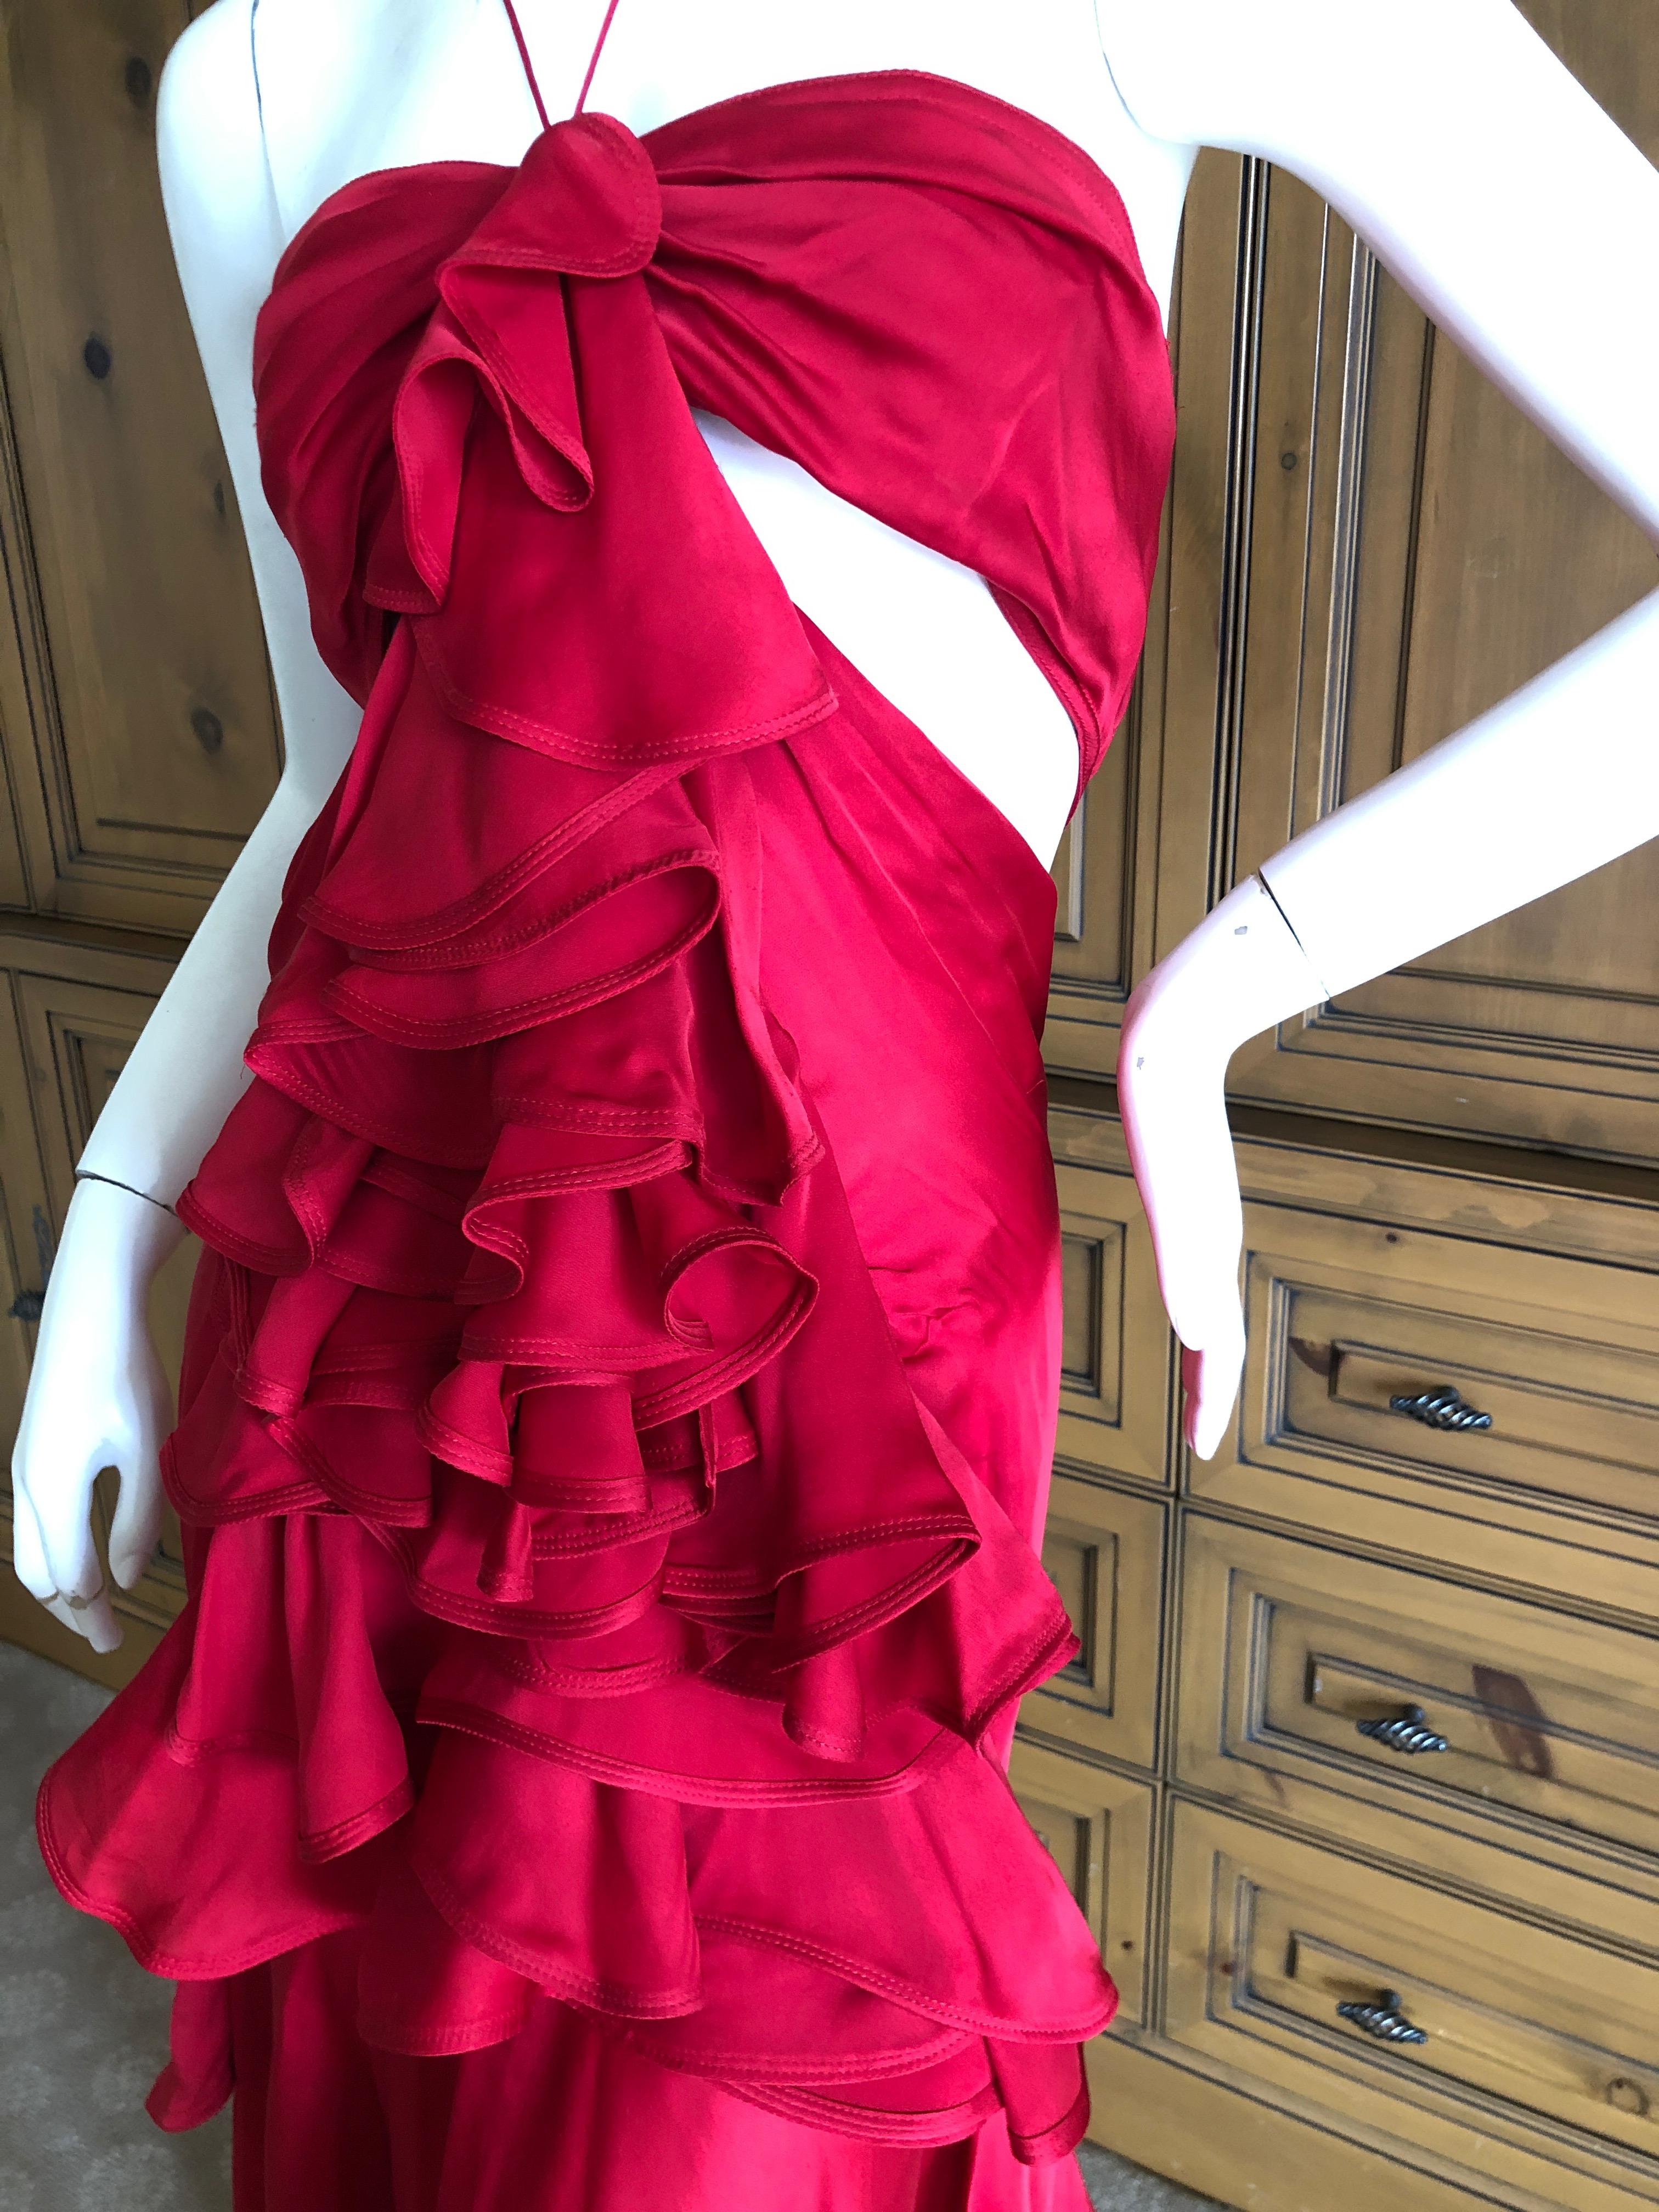 Yves Saint Laurent by Tom Ford 2003 Ruffled Red Silk Dress Size 40 For Sale 1